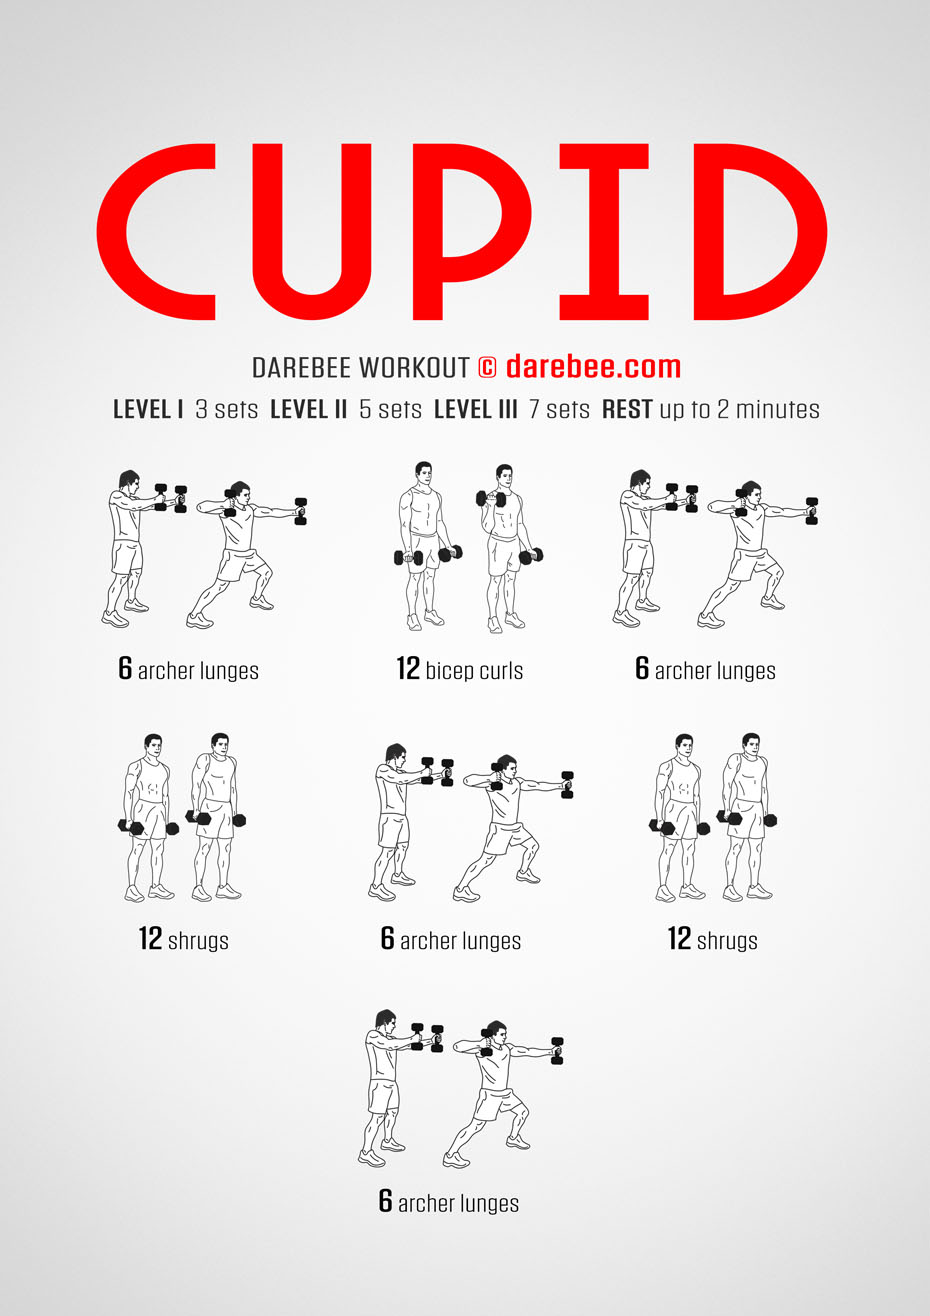 Cupid is a Darebee home-fitness workout that requires some dumbbells and some pretty nifty tendon strength to pull off